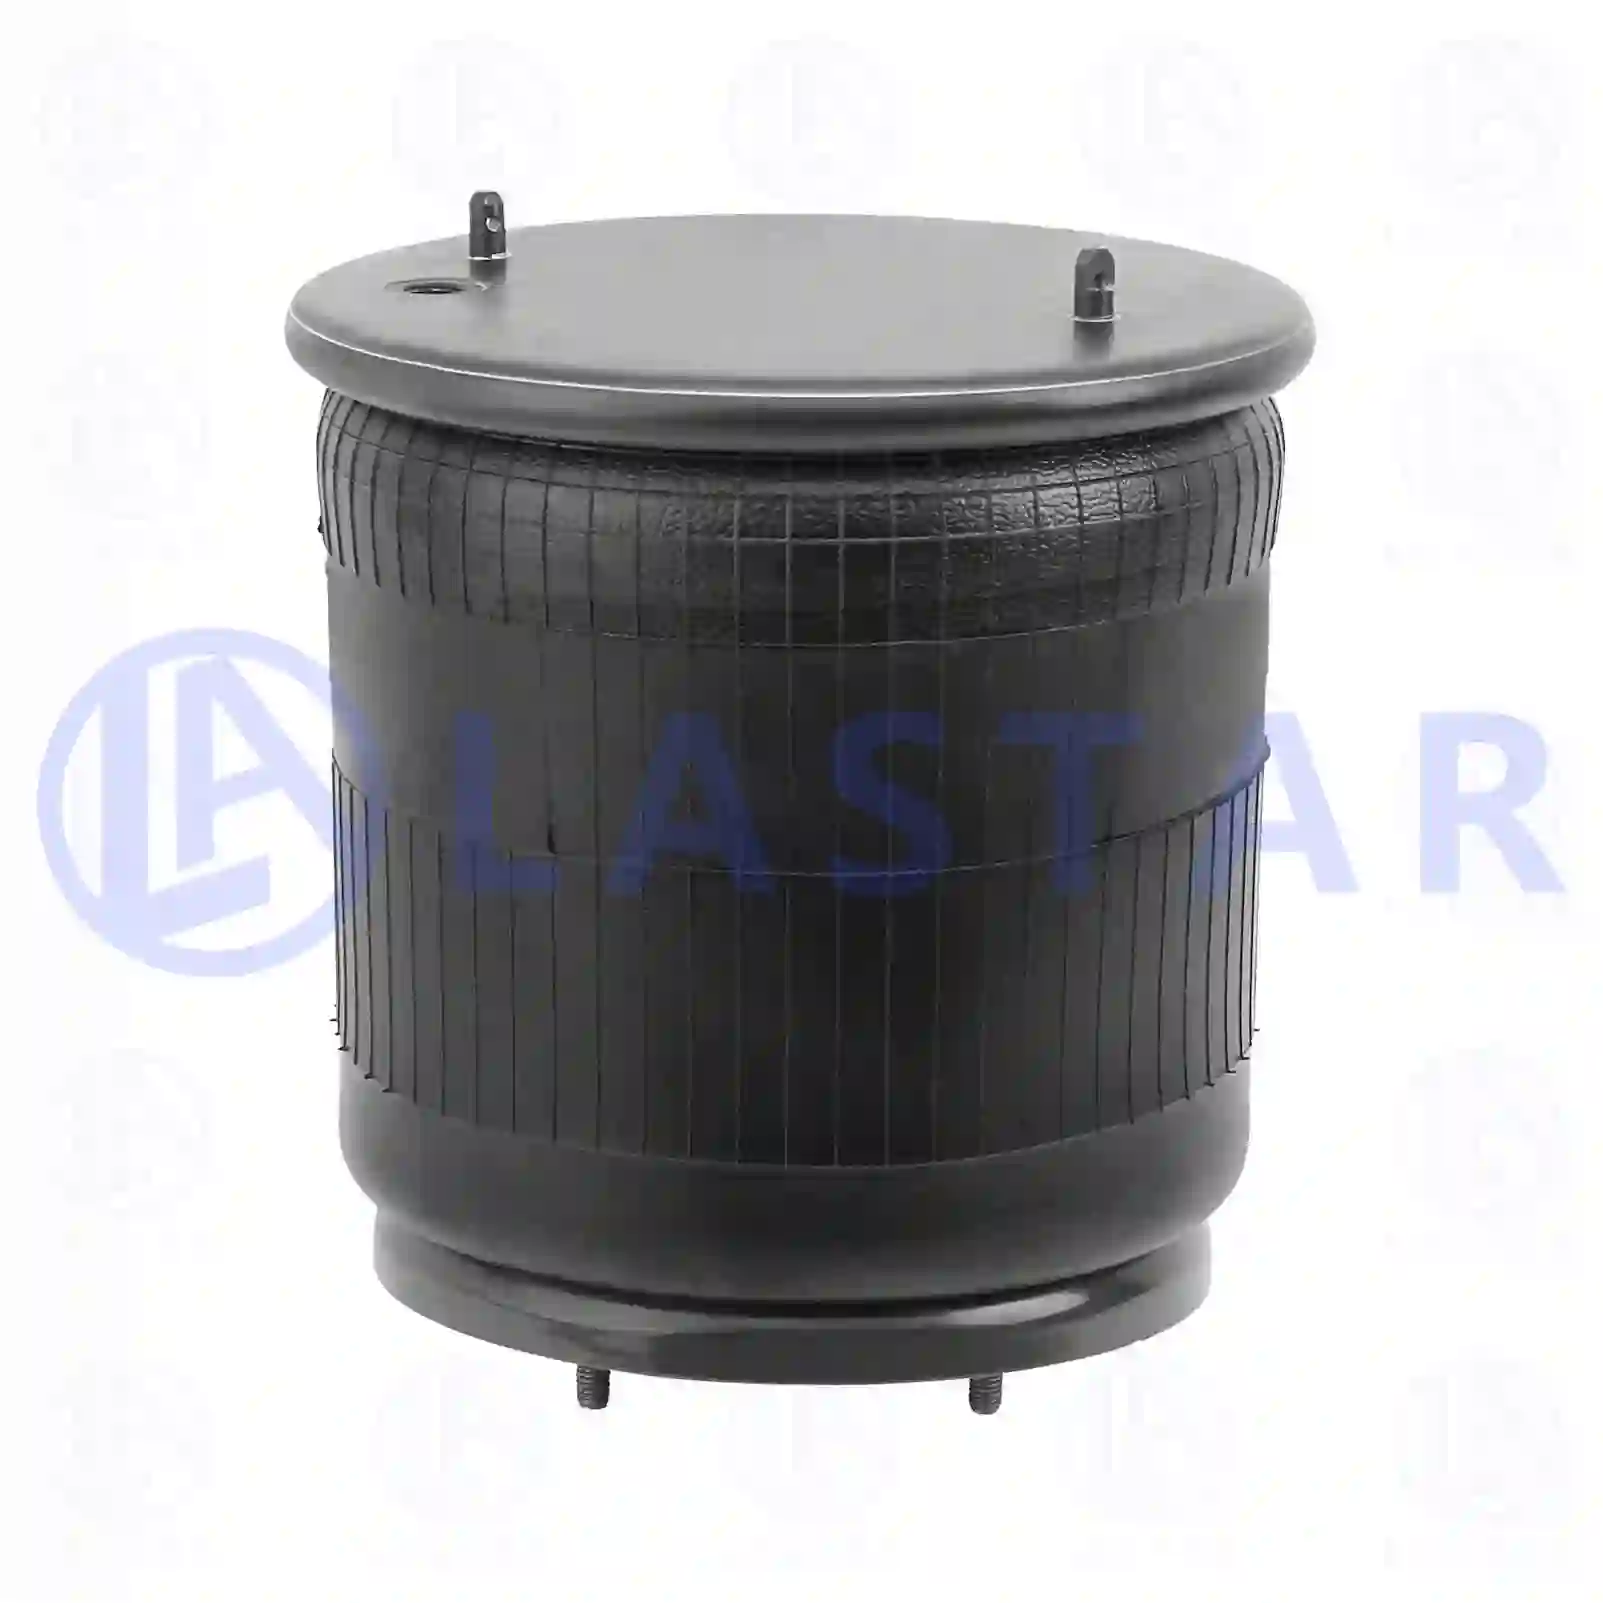 Air spring, with steel piston, 77727611, 21057936, 21097433, 21160951, 21513833, 70311683, ZG40765-0008 ||  77727611 Lastar Spare Part | Truck Spare Parts, Auotomotive Spare Parts Air spring, with steel piston, 77727611, 21057936, 21097433, 21160951, 21513833, 70311683, ZG40765-0008 ||  77727611 Lastar Spare Part | Truck Spare Parts, Auotomotive Spare Parts